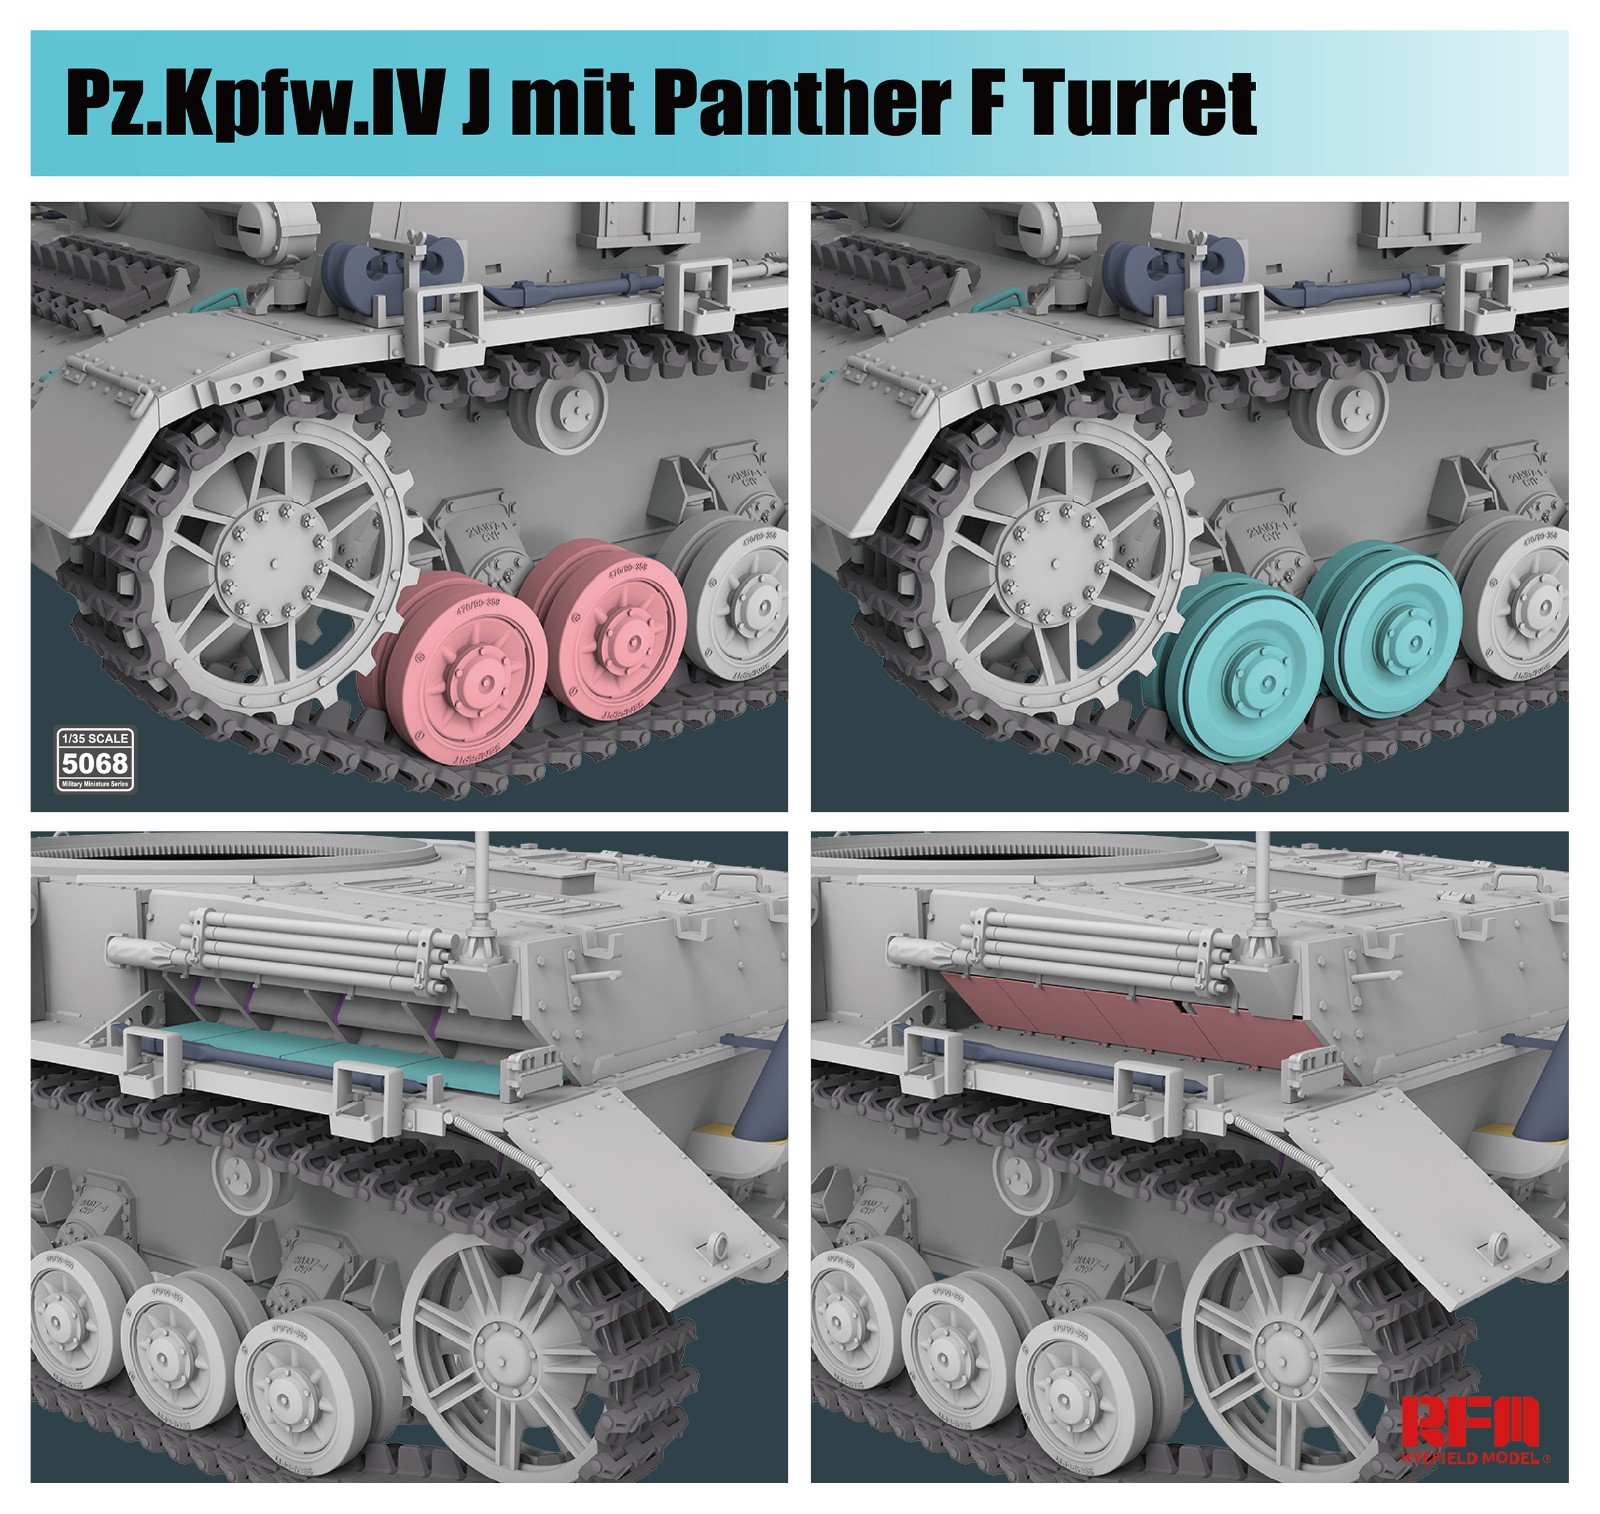 1/35 Pz.Kpfw.IV Ausf.J mit Panther Ausf.F Turret - Click Image to Close